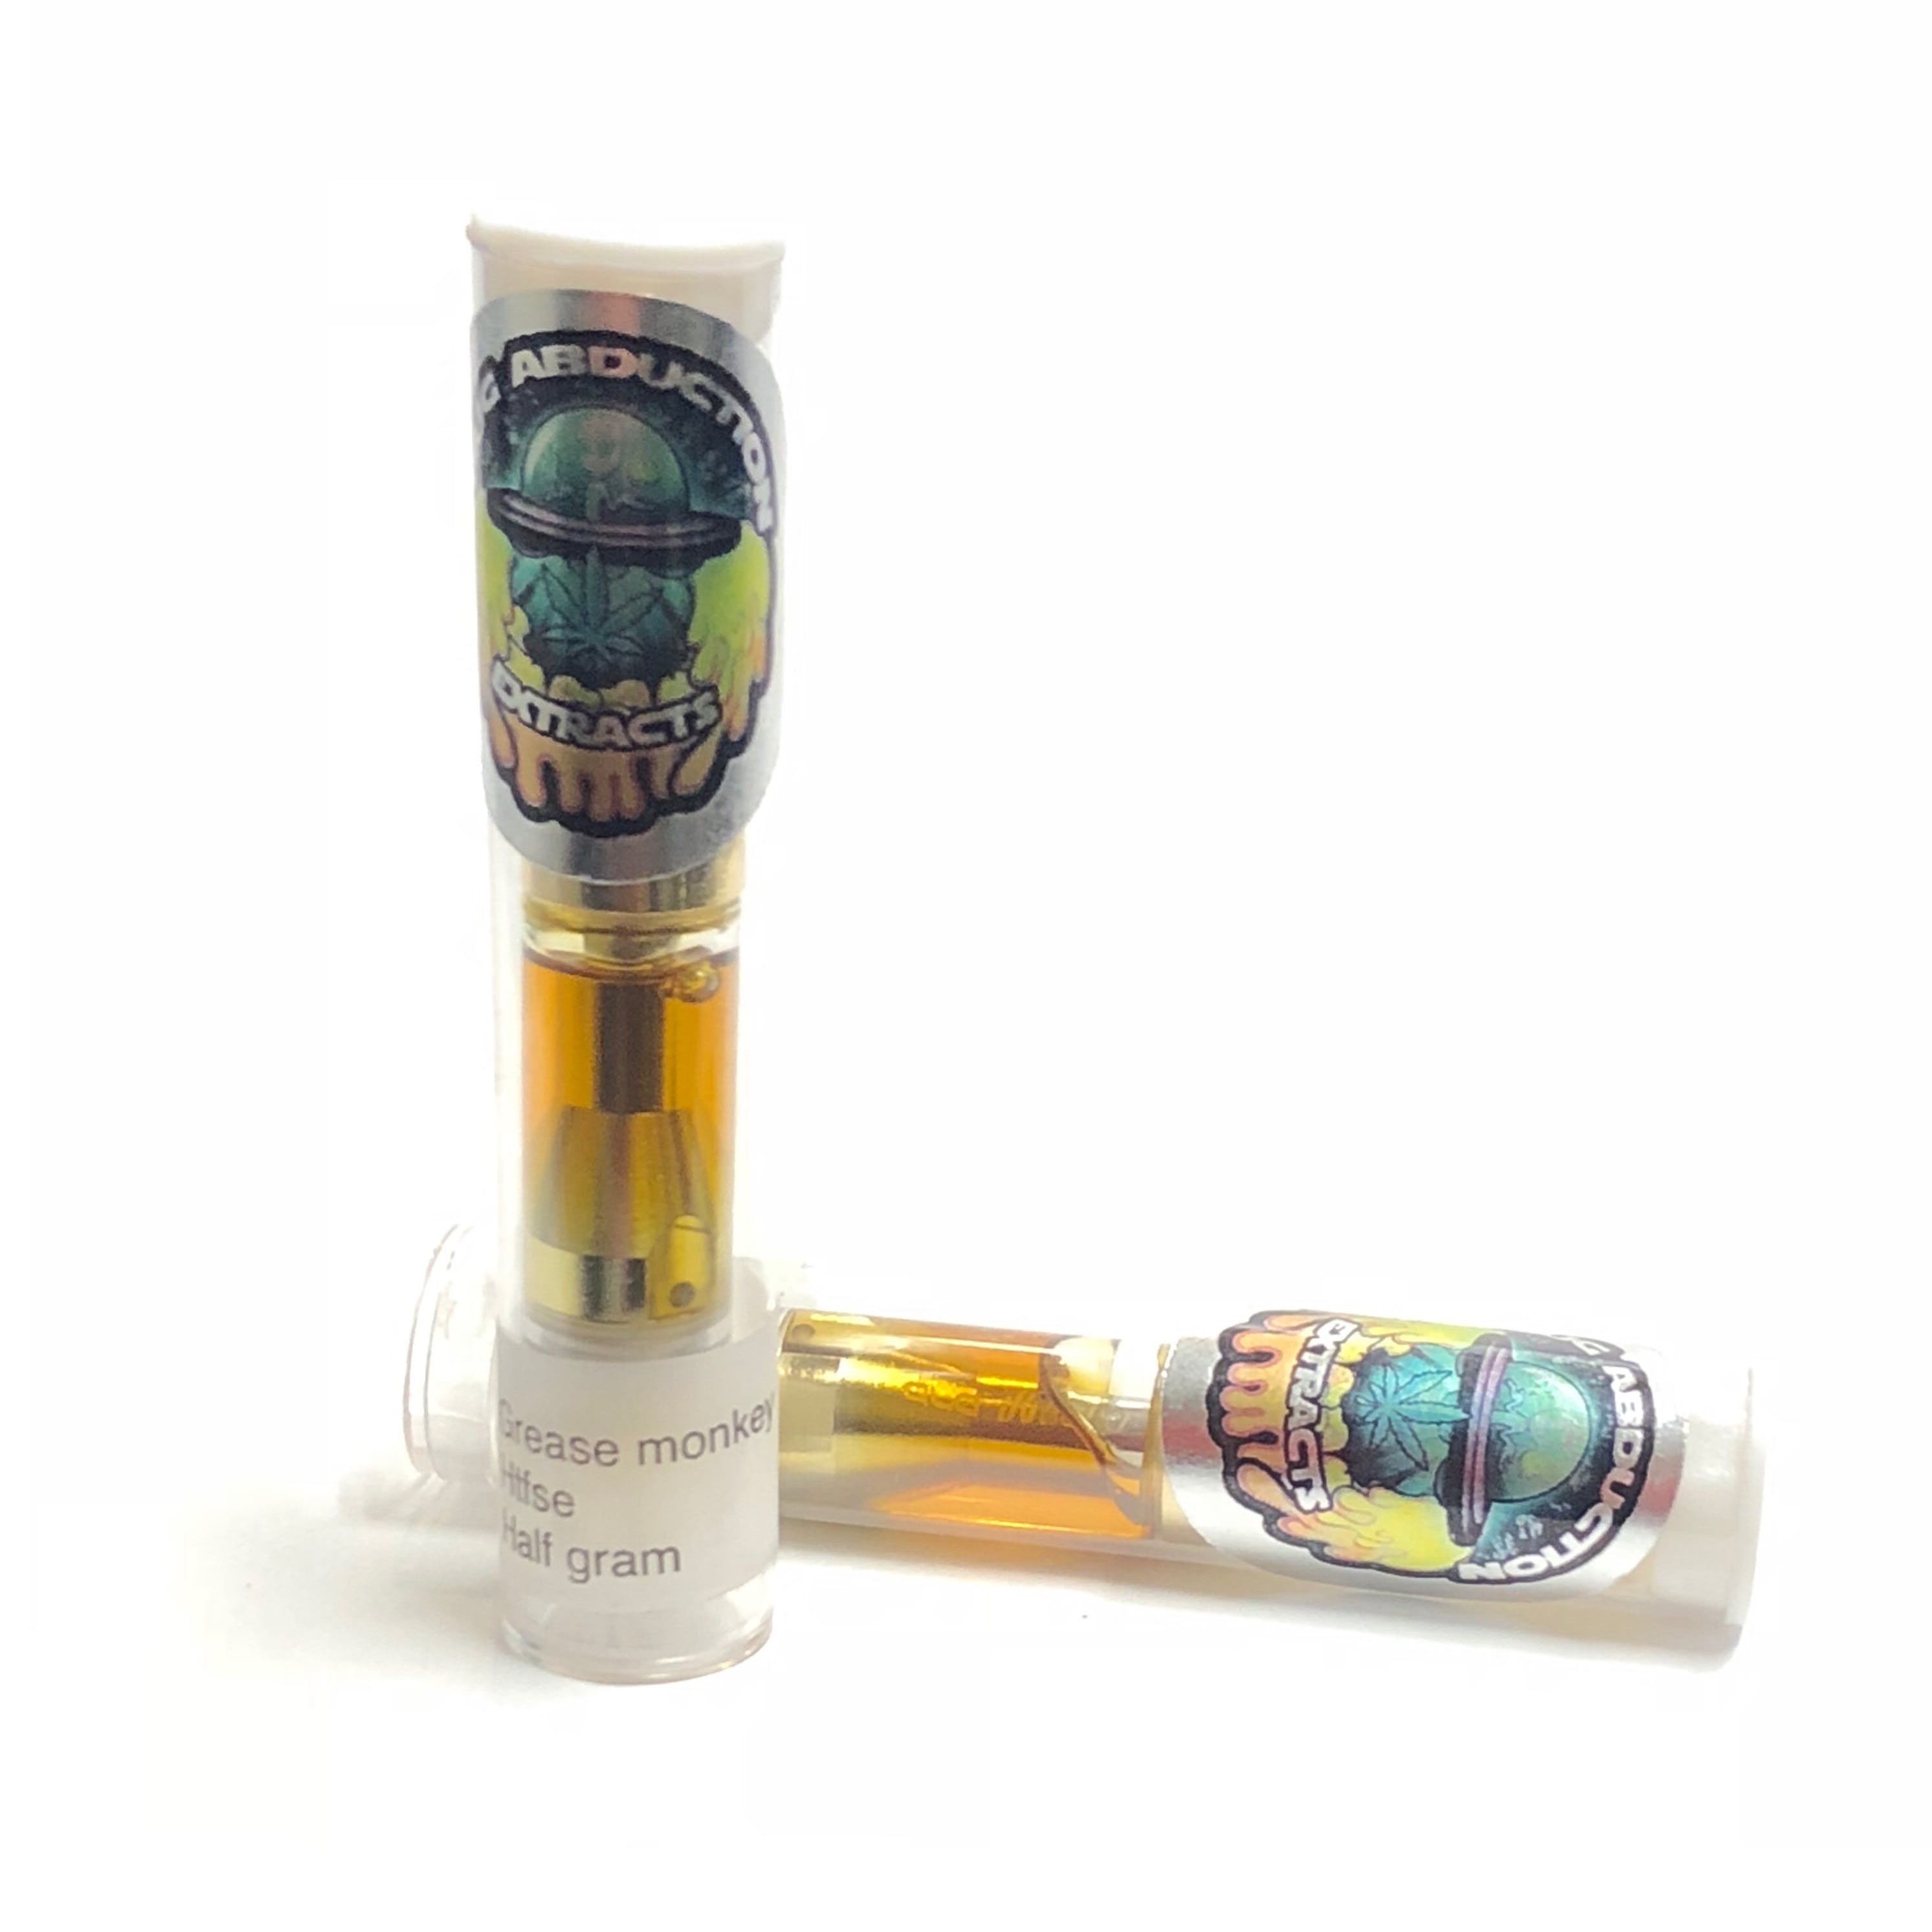 concentrate-nug-abduction-extracts-htfse-cartridges-3-24120